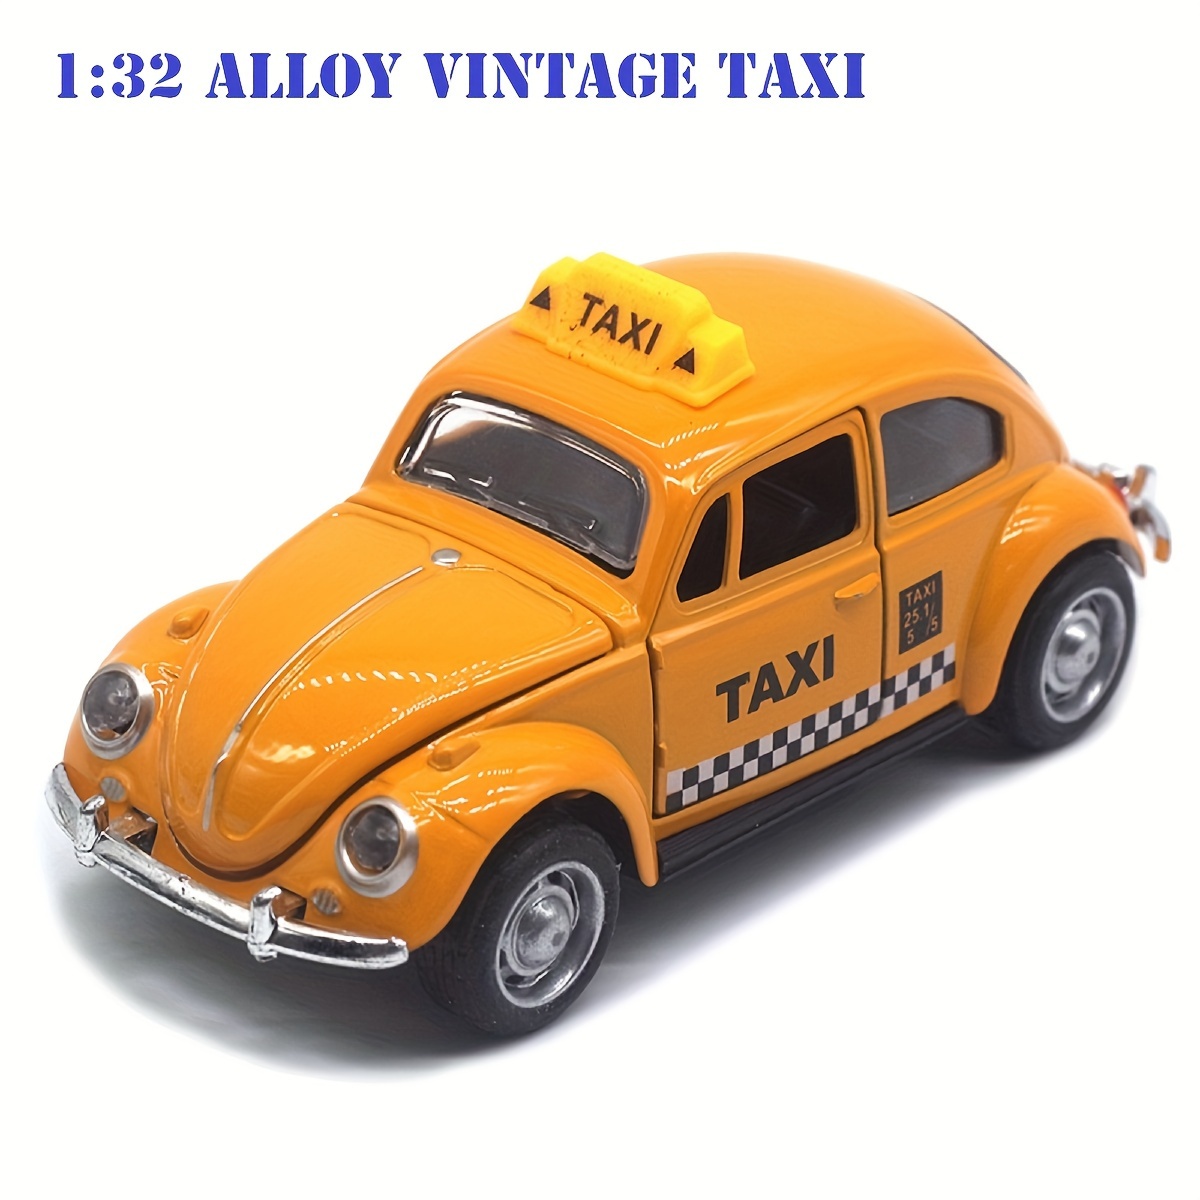 

Vintage Yellow Taxi Die-cast Toy Car - 1:32 Scale Alloy Pull Back Vehicle For Young Collectors